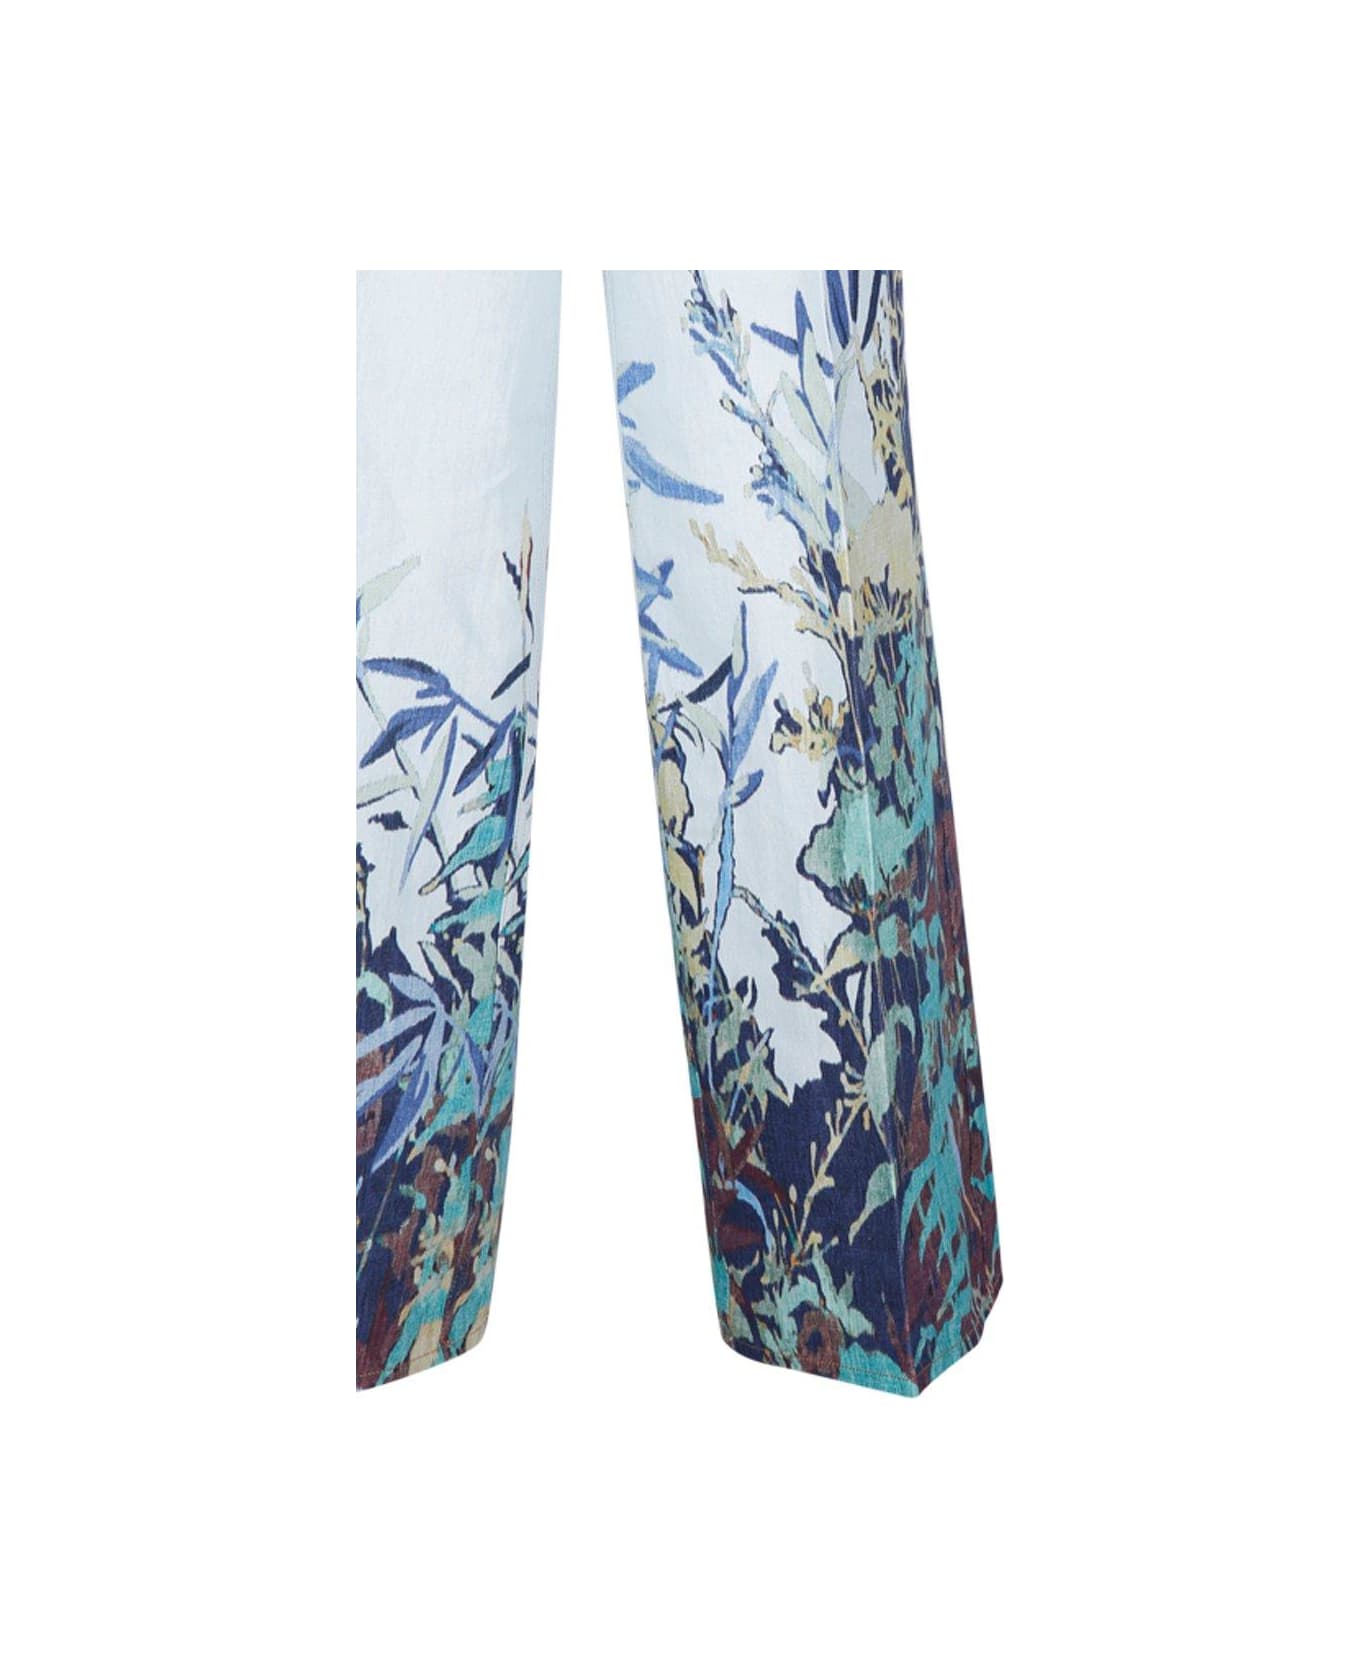 Forte_Forte Heaven-printed Wide-leg Jeans - Clear Blue